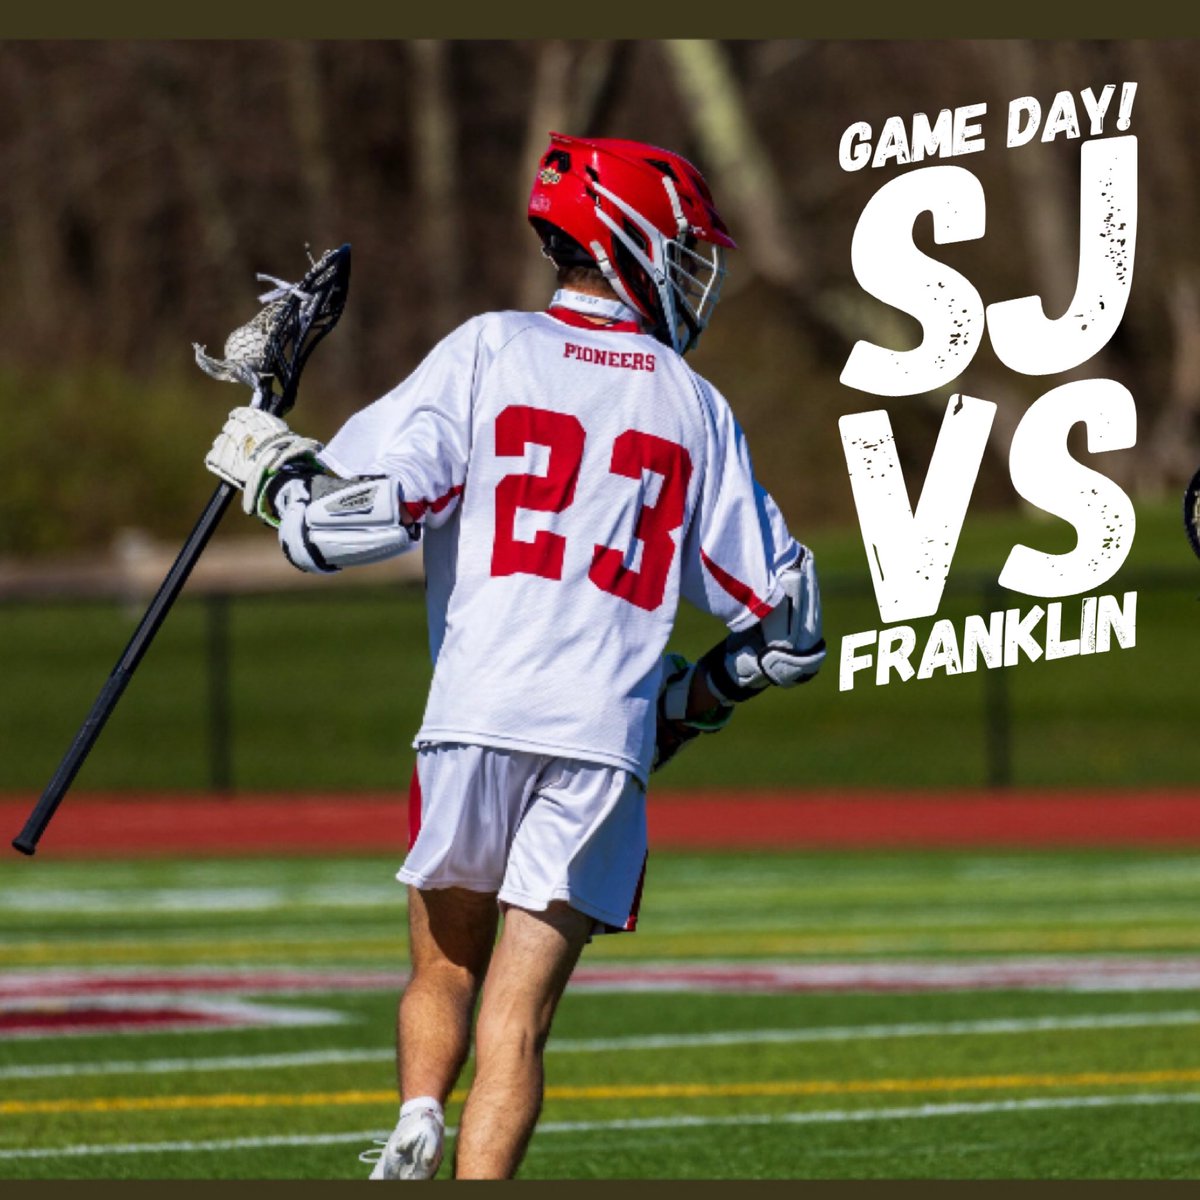 Game Day! Freshman lacrosse will host Franklin this afternoon! @SJHS_PioneersAD